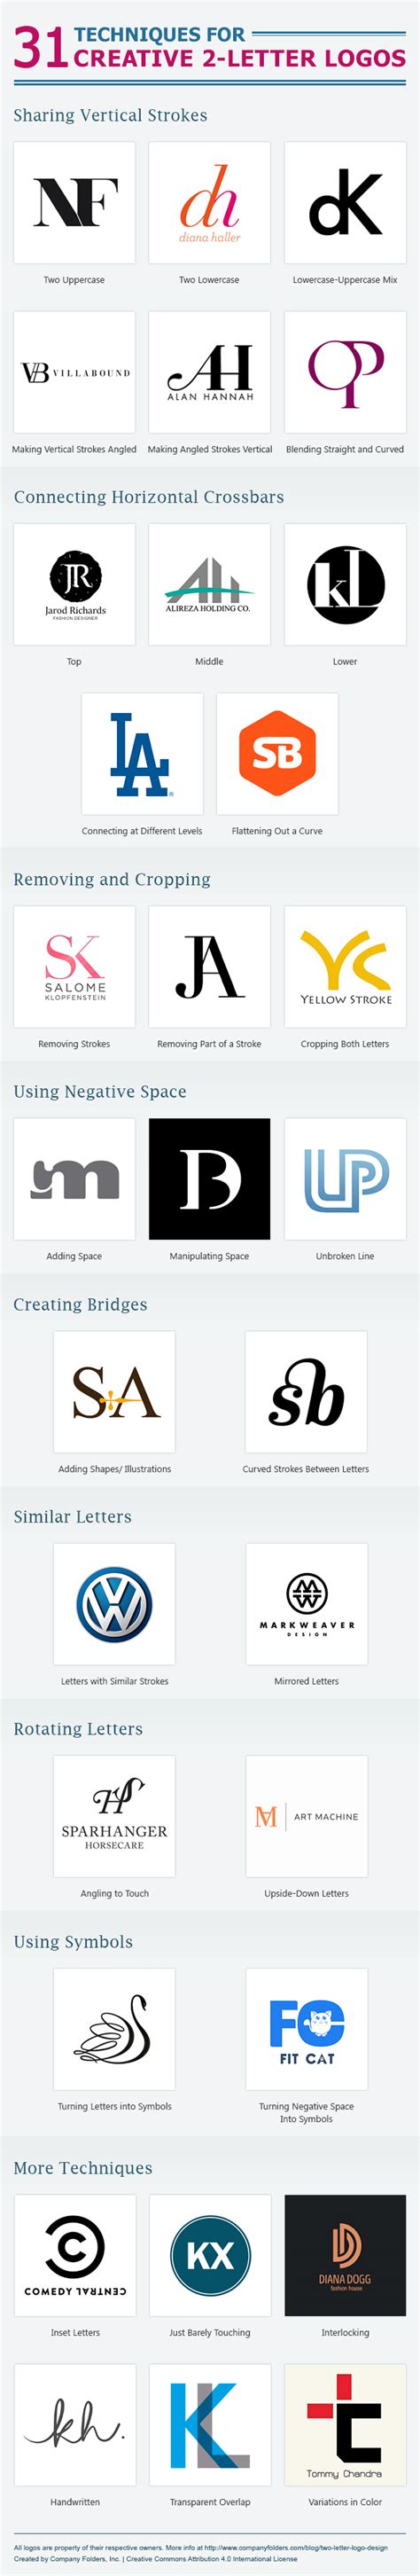 31 Design Ideas For Cool Two Letter Logos